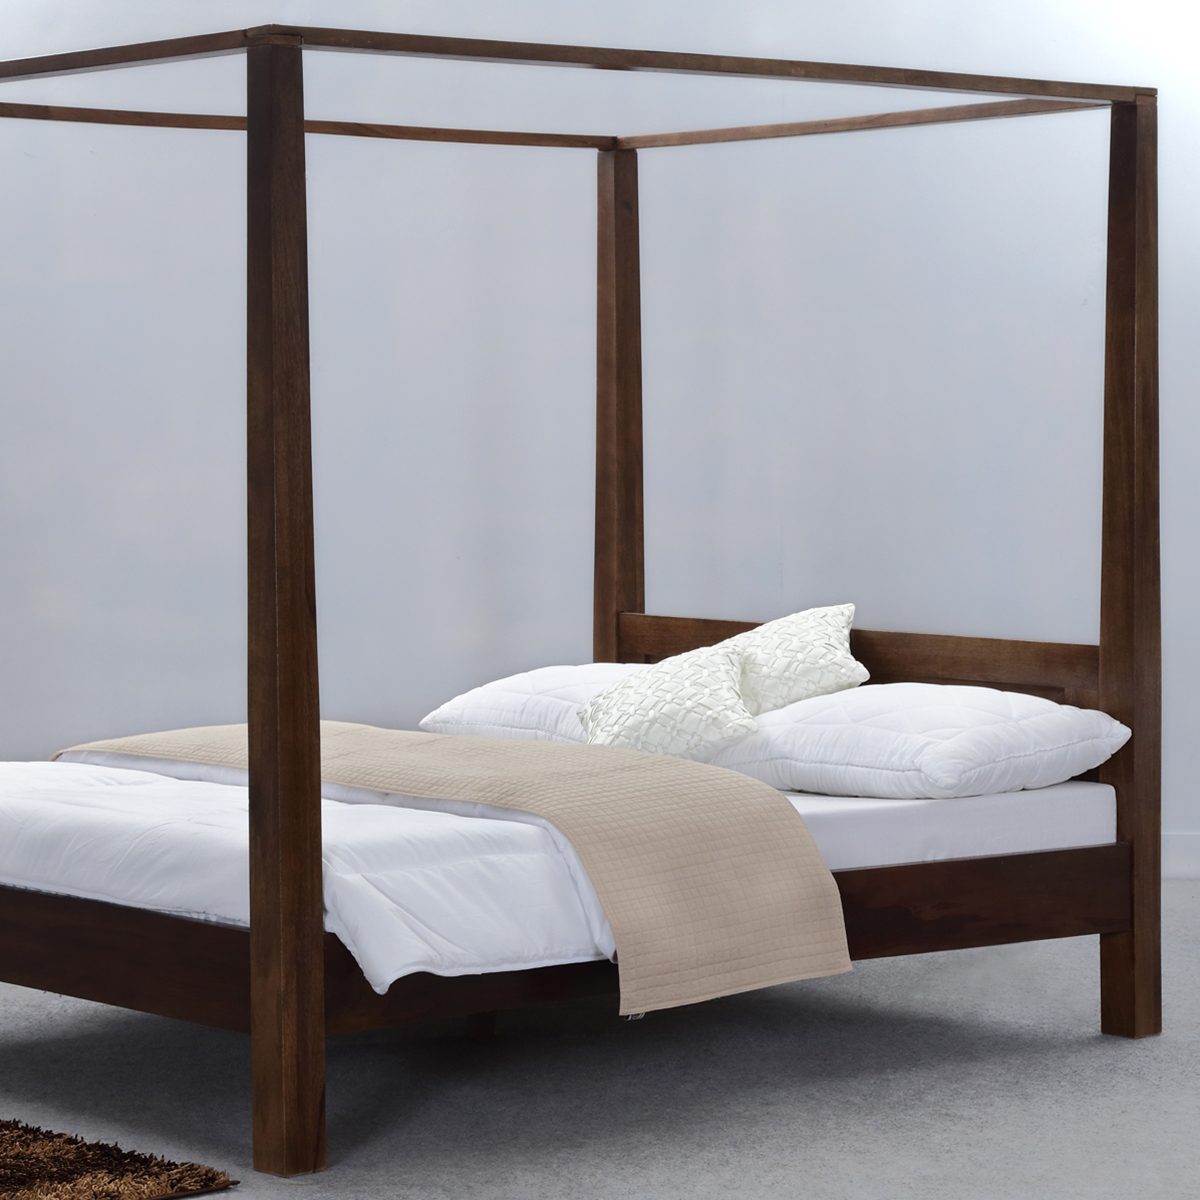 Introducing New Solid Wood Bed, Bed Frames Philadelphia